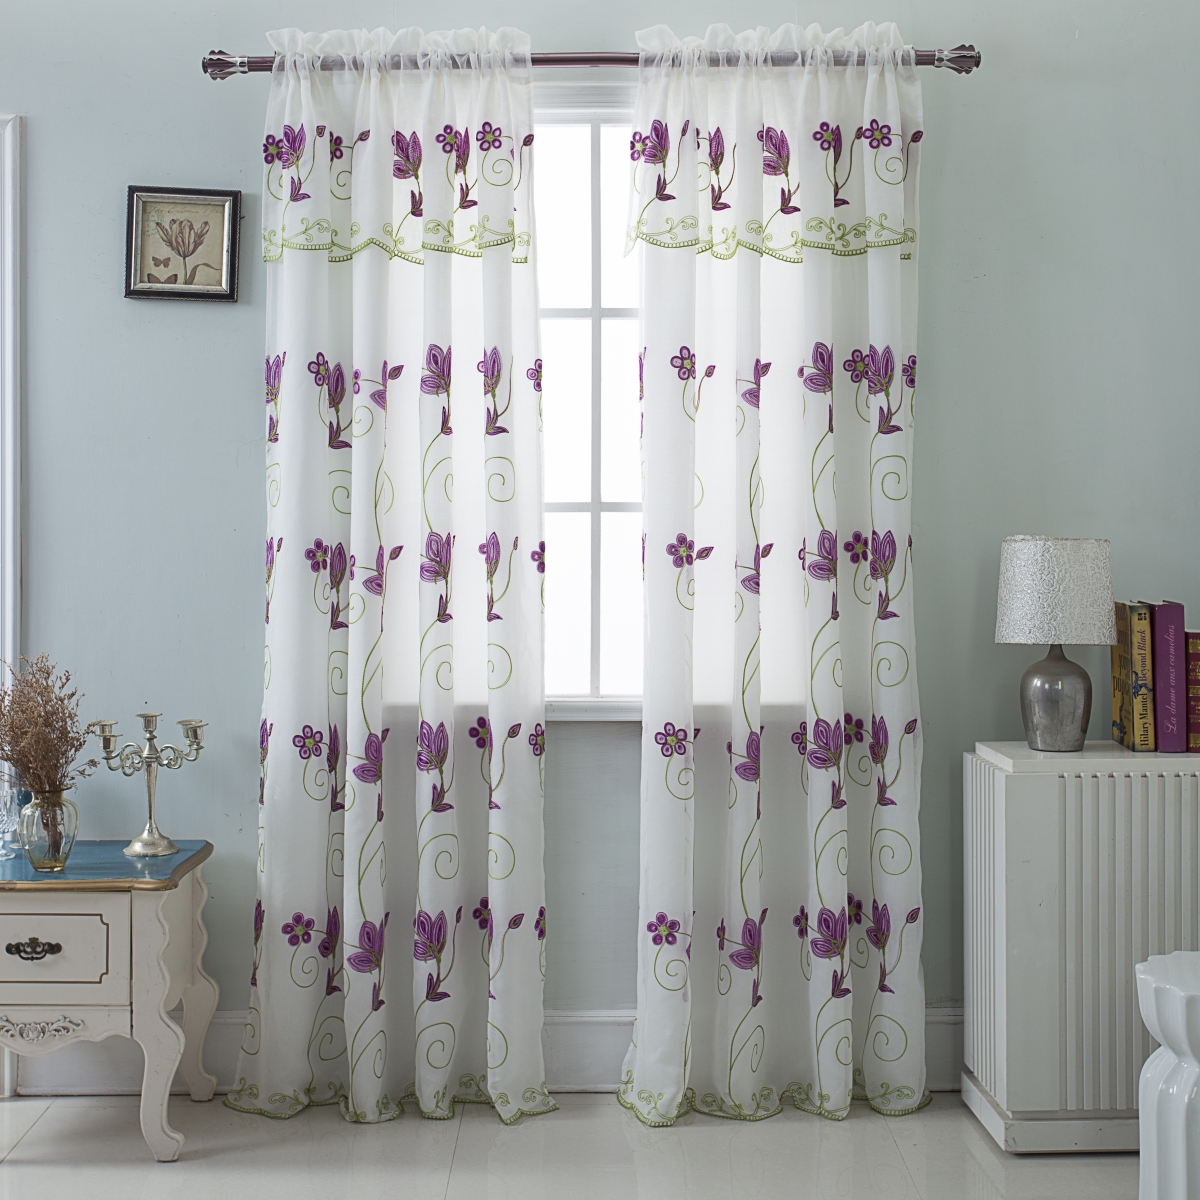 Pnv17174 54 X 84 In. Vittoria Embroidered Satin Layered Rod Pocket Single Curtain Panel With Attached 18 In. Valance, Purple